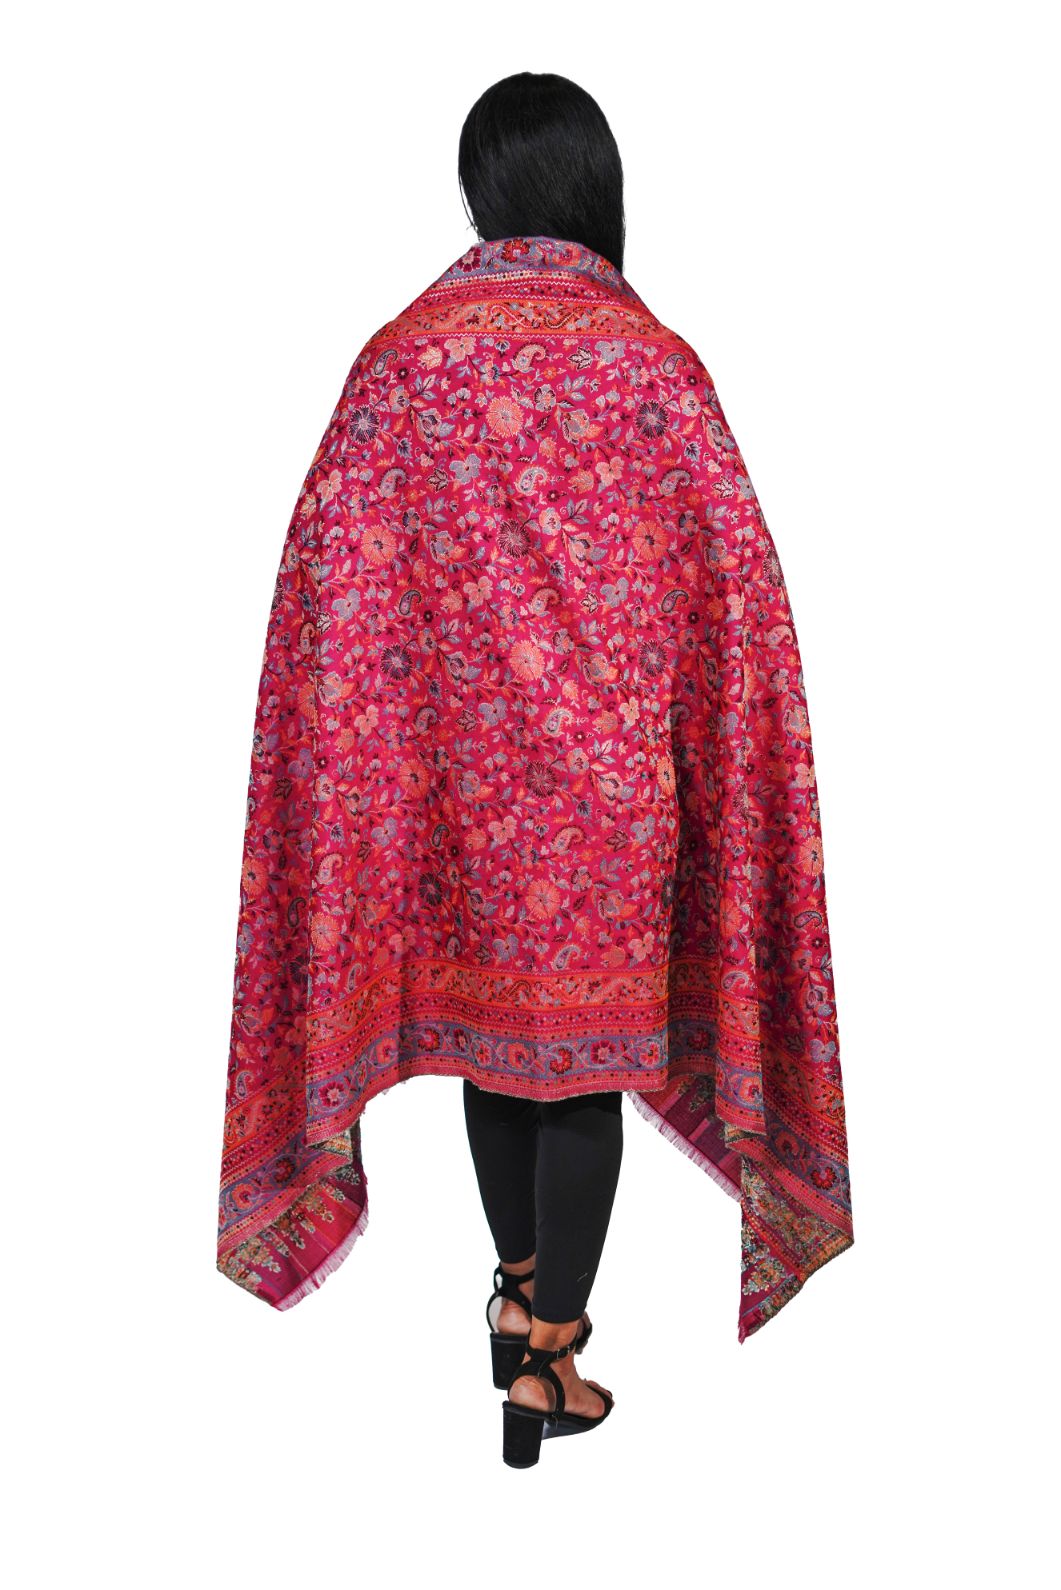 Soft Bamboo Modal Shawl with Zari for Women - Rich Pink